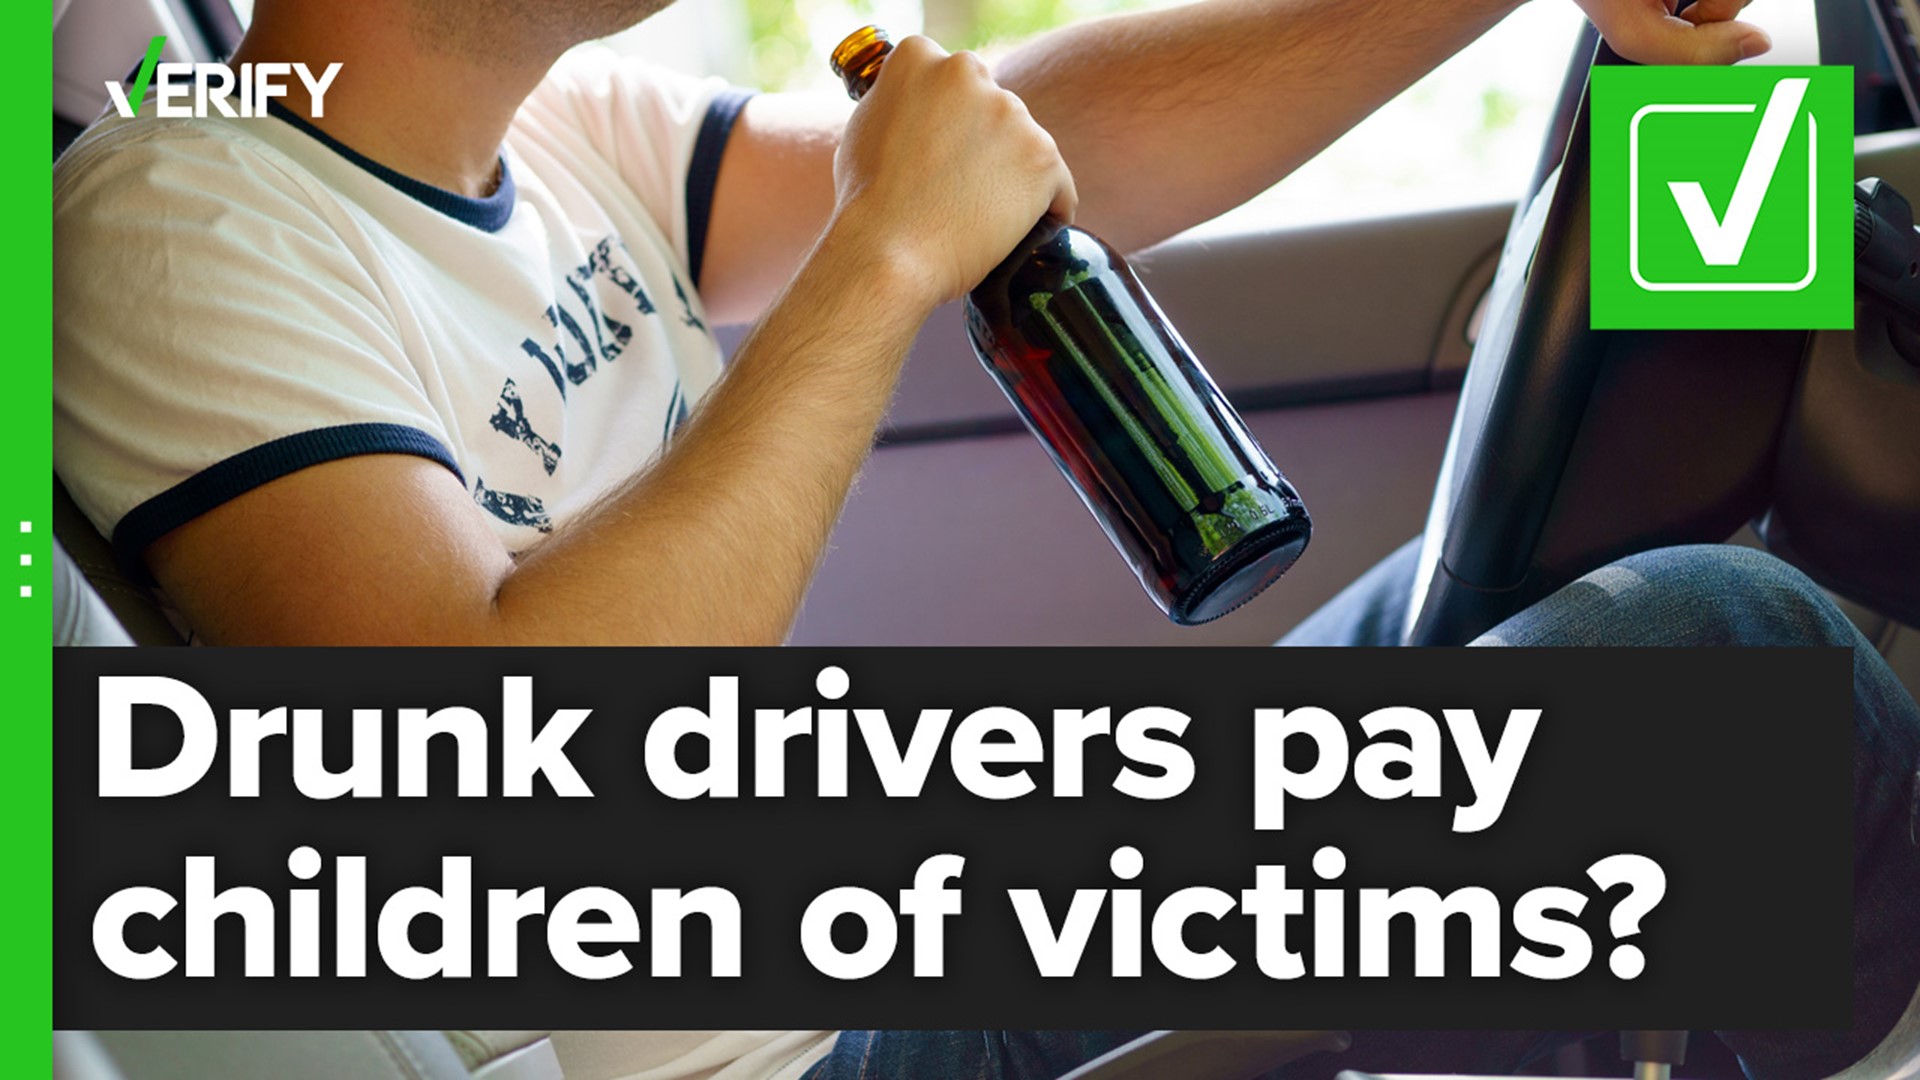 A Tennessee bill requiring drunk drivers to support victims’ children is heading to the governor’s desk. Other states are also considering similar legislation.